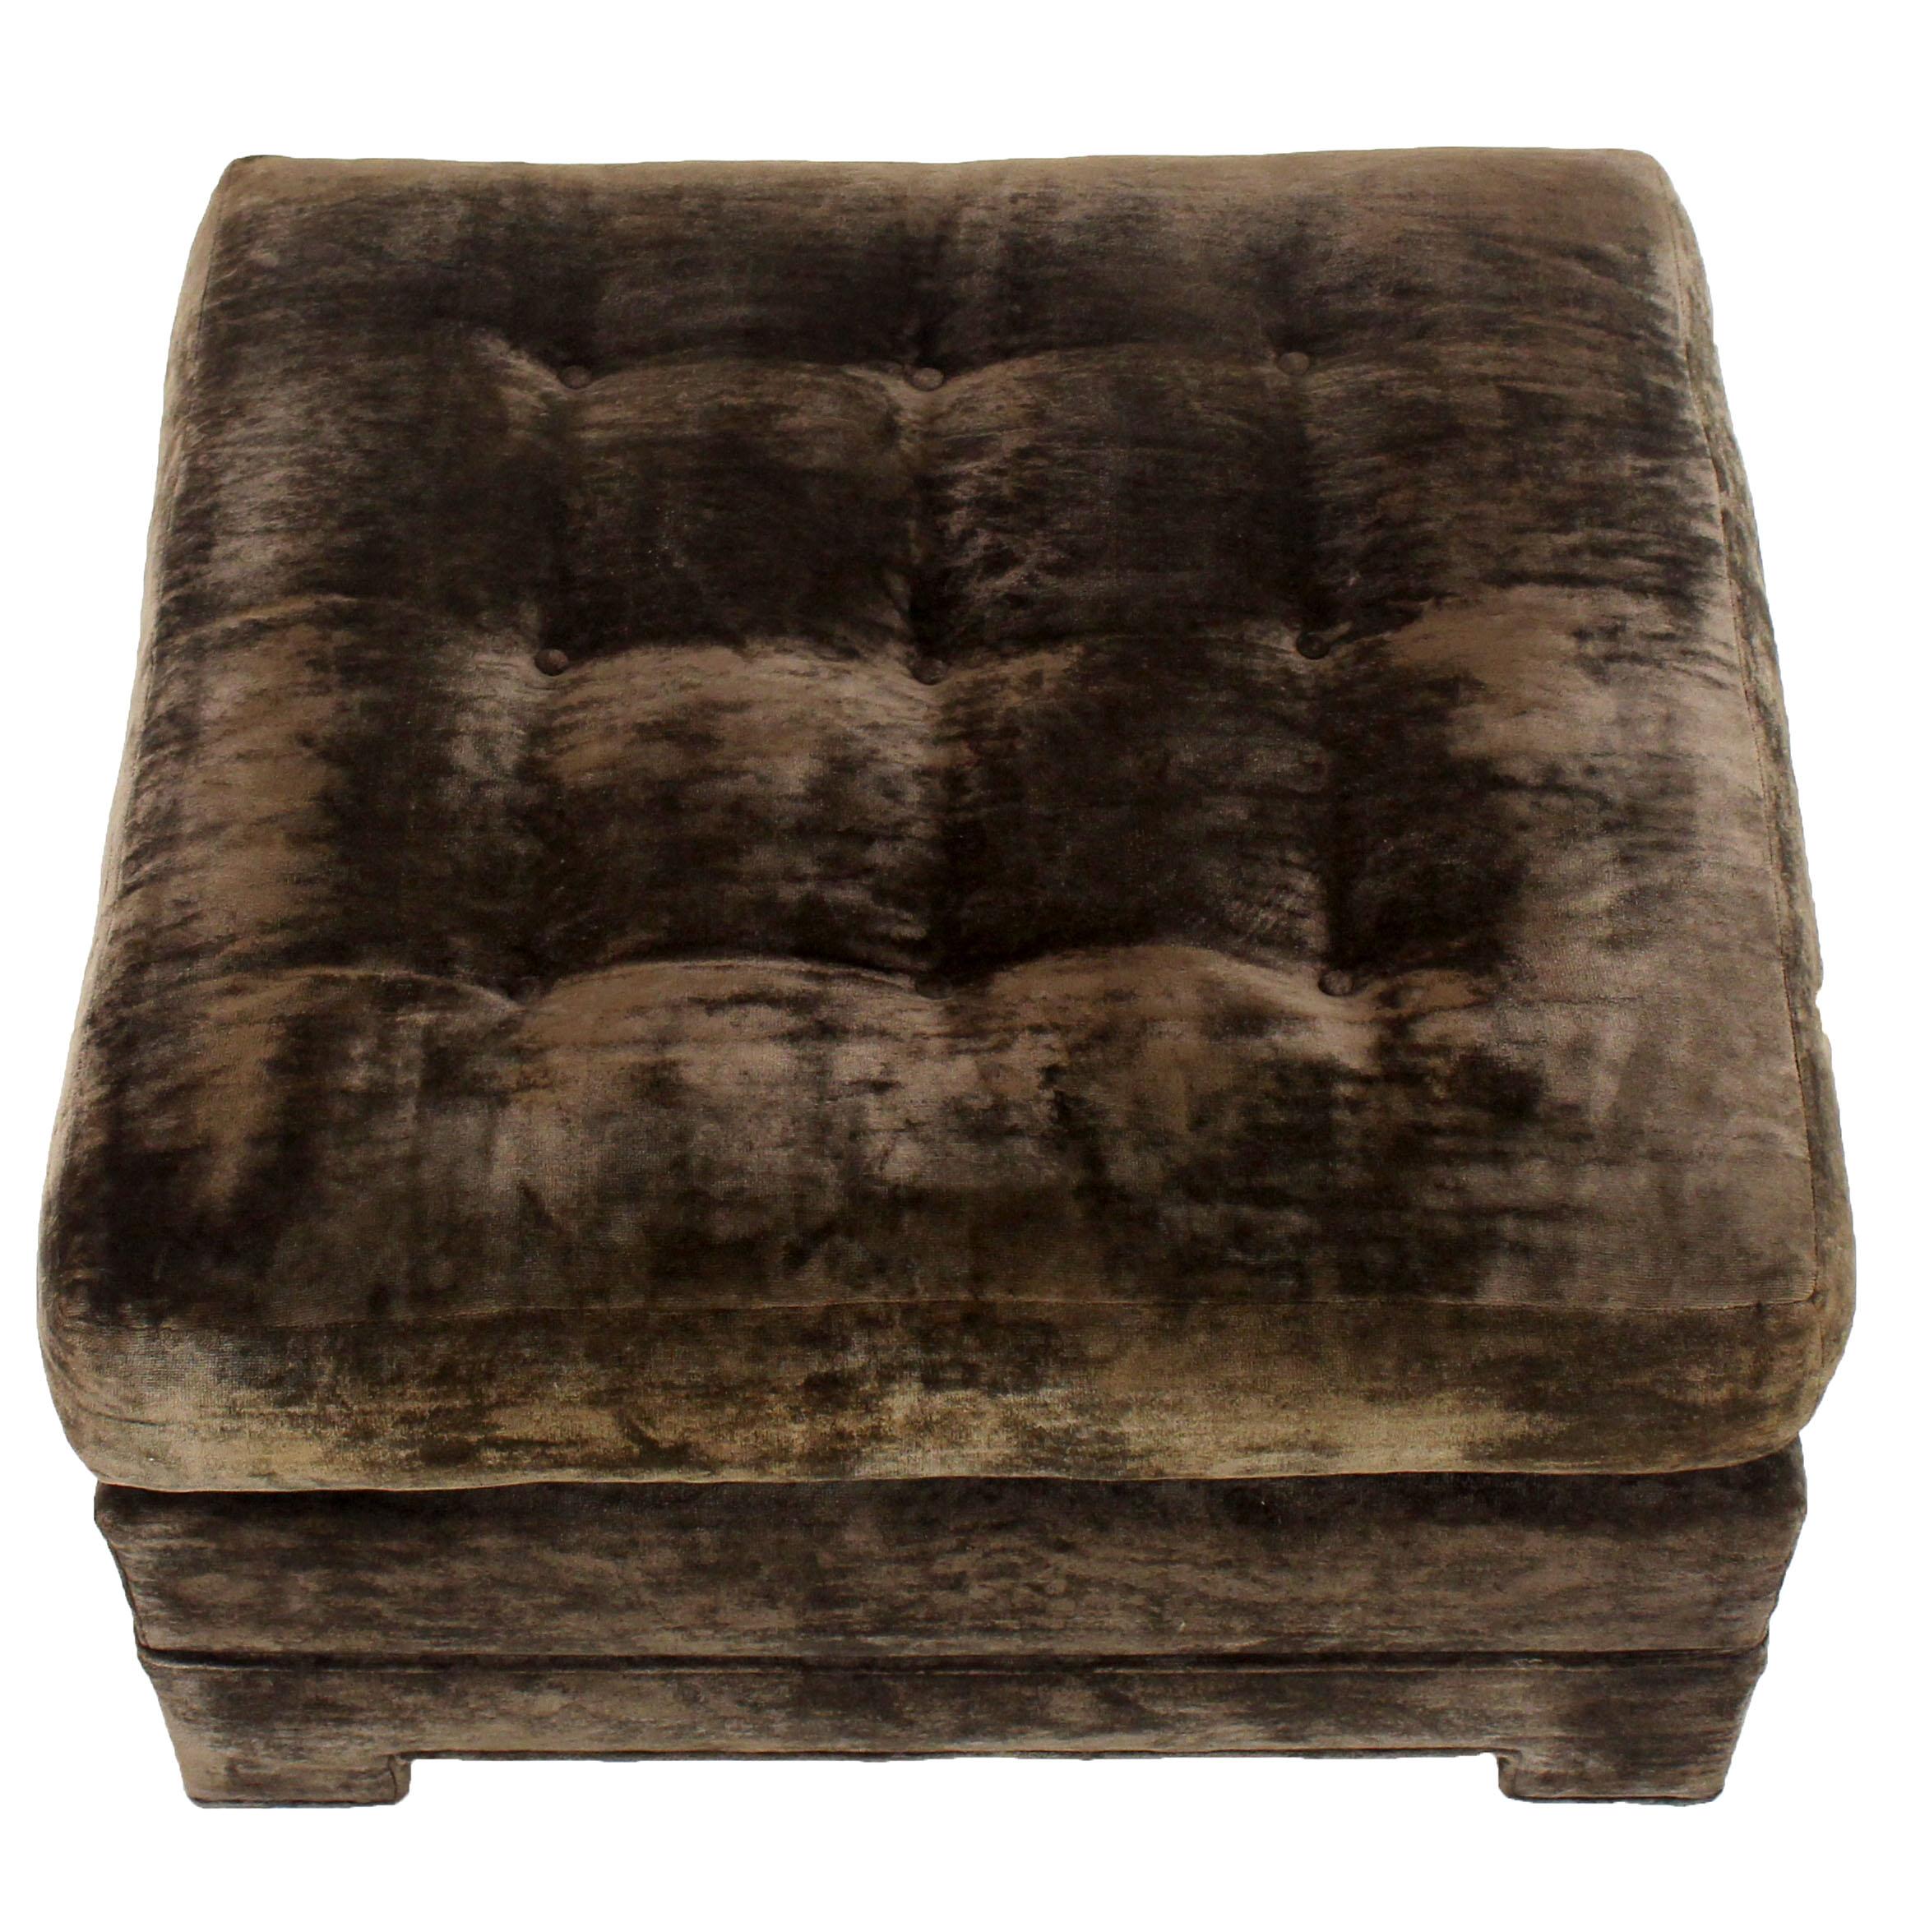 20th Century Large Square Deep Bronze Velvet Upholstery Tufted Upholstery Ottoman Footstool For Sale